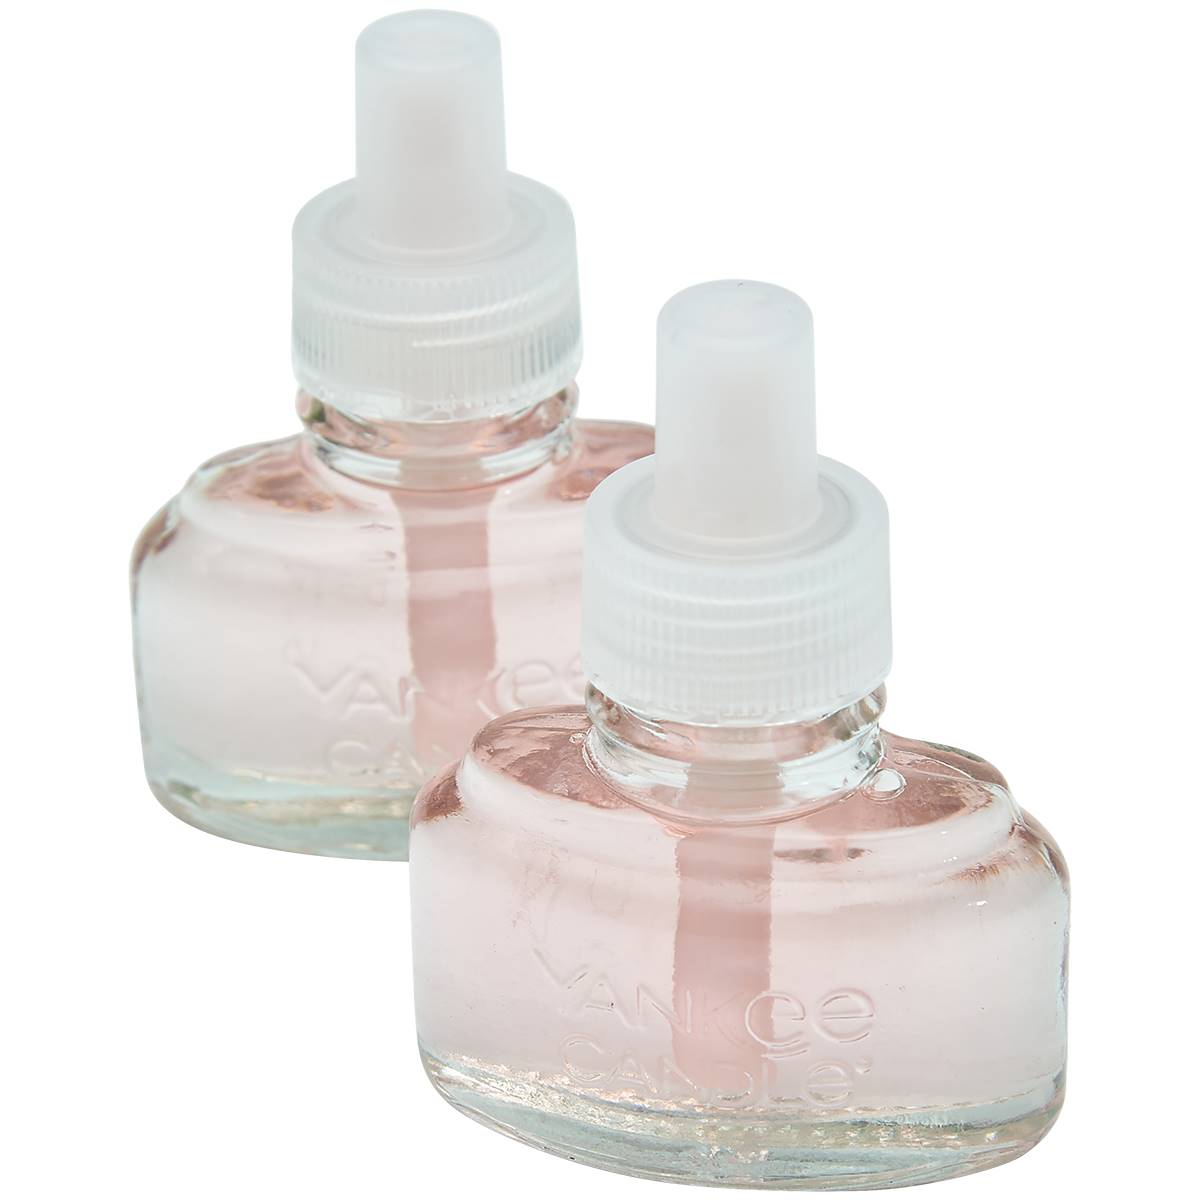 Yankee Candle(R) ScentPlug(R) Pink Sands Refill - Set Of 2